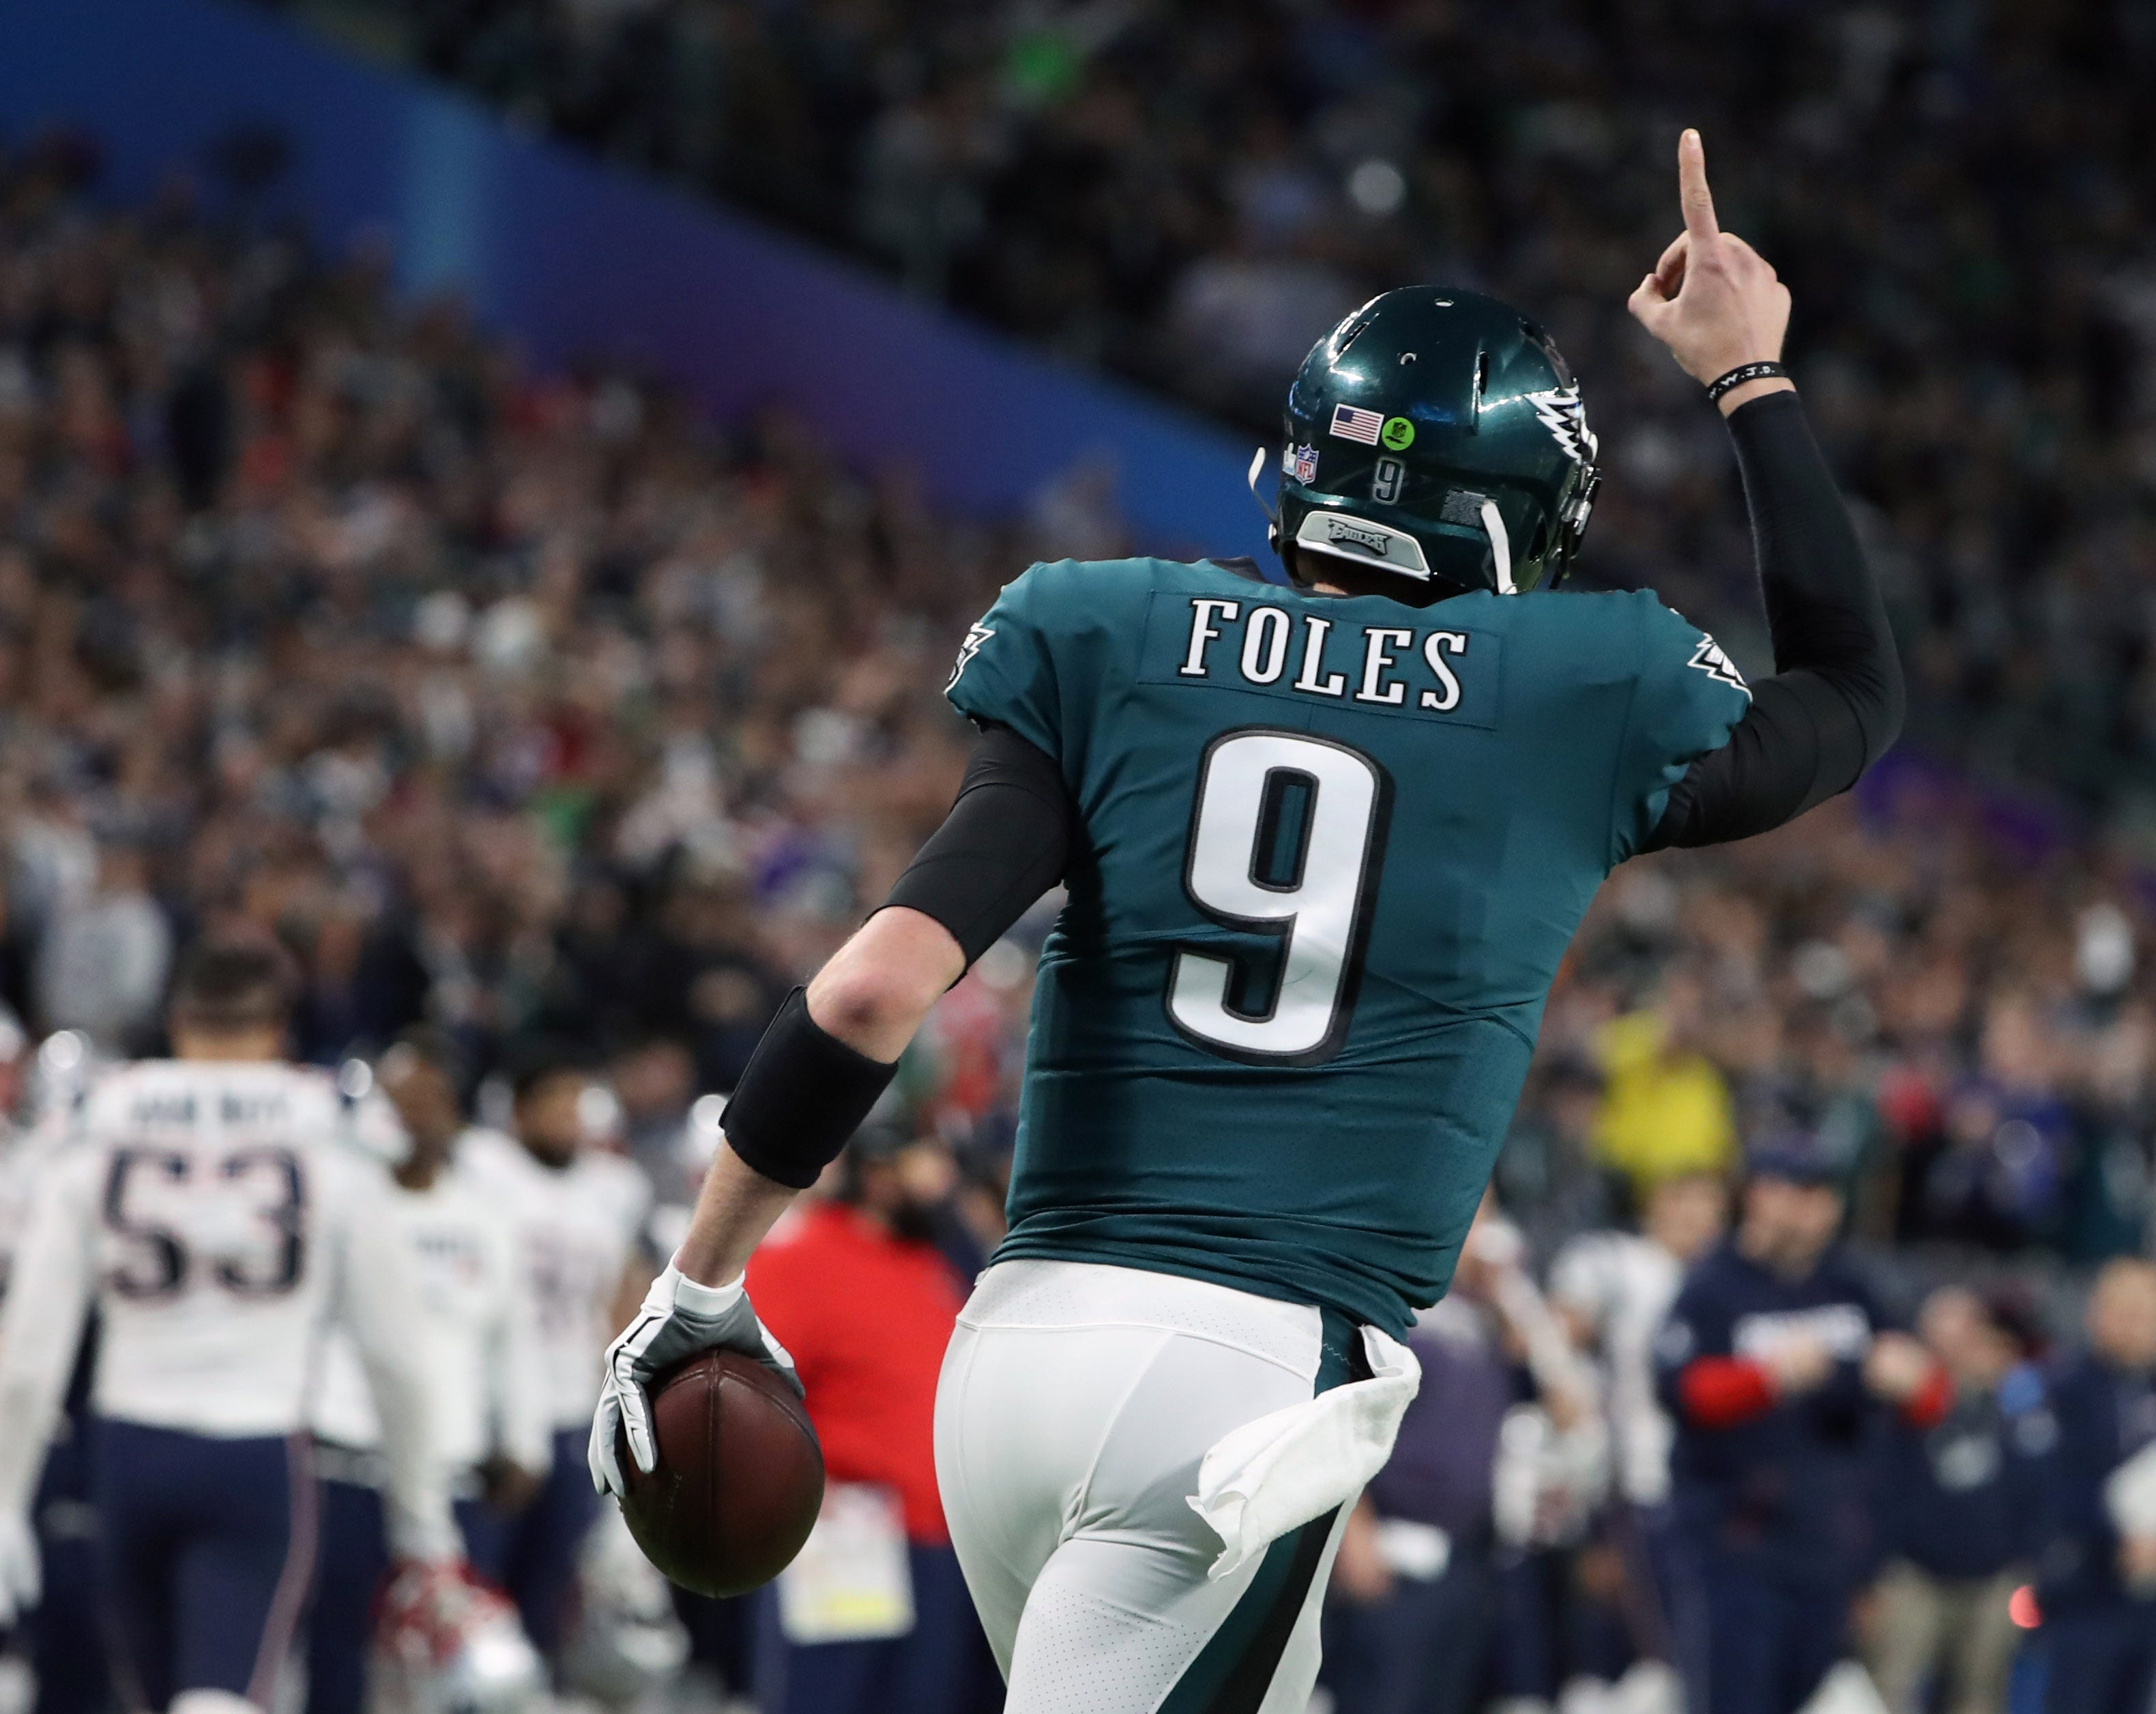 nick foles jersey with super bowl logo